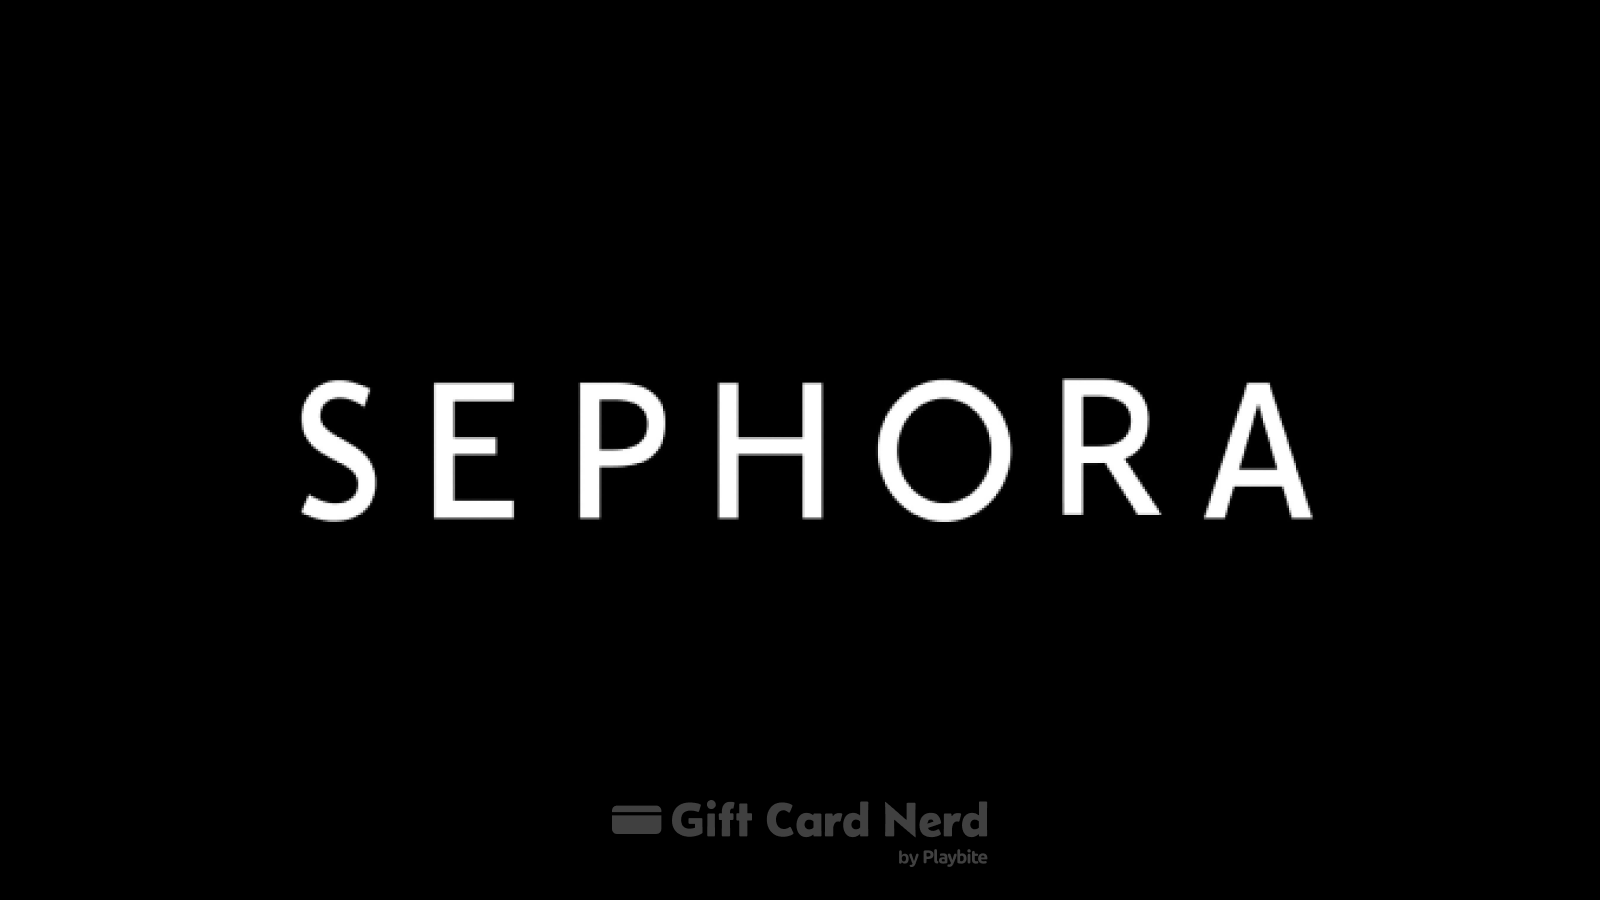 Does Walmart Sell Sephora Gift Cards?